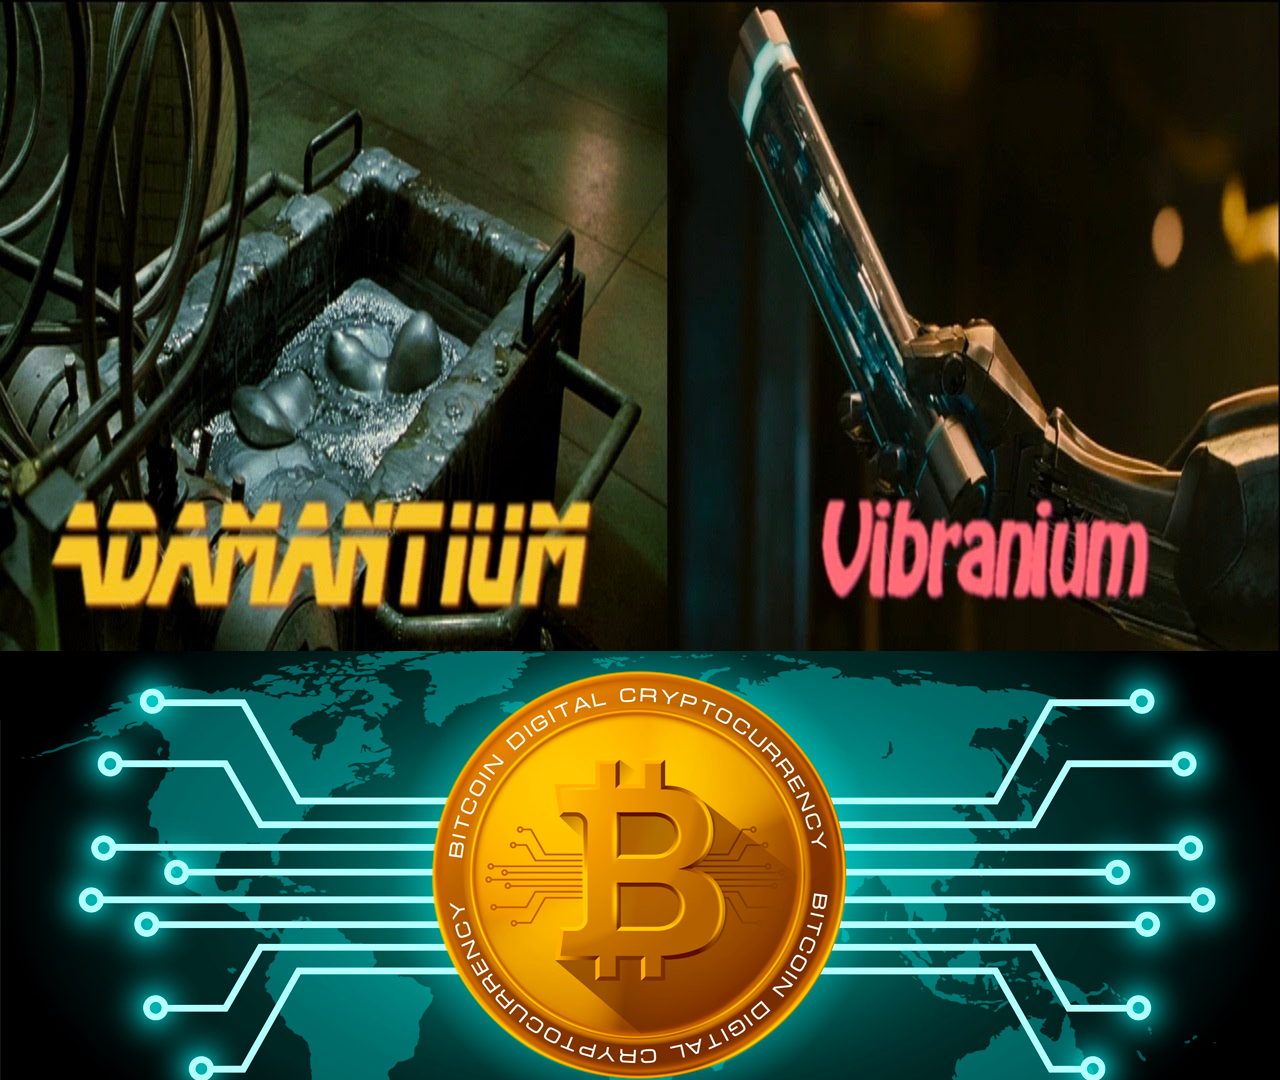 Building Wakanda: CryptoCurrency is the Vibranium of Africa